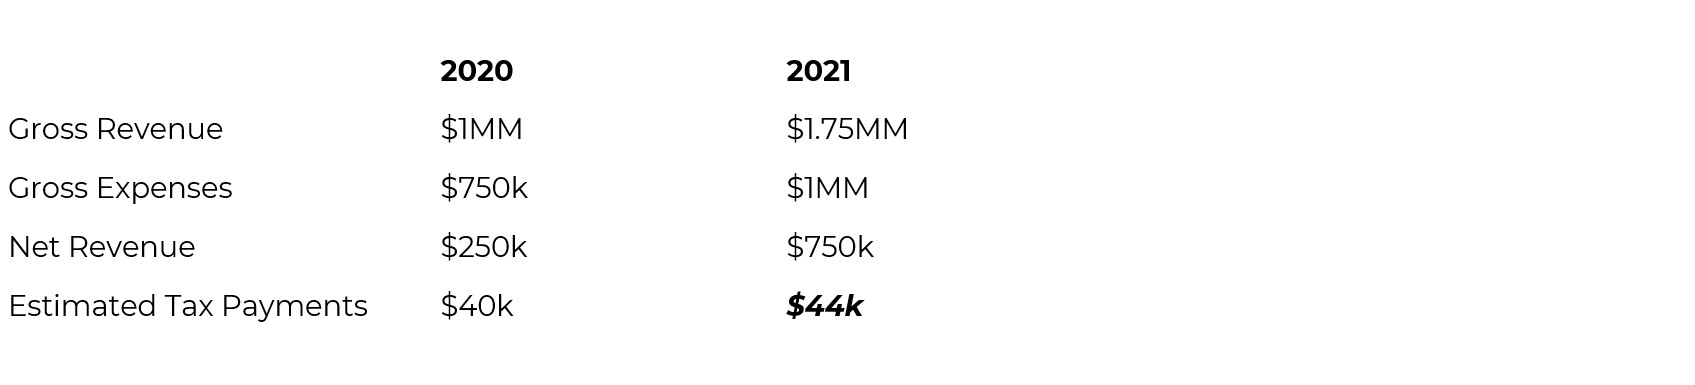 A tab chart shows the estimated tax payments for a net revenue of $250K in 2020 (tax payment of $40k) and for a net revenue of $750k in 2021 (tax payment of $44k).